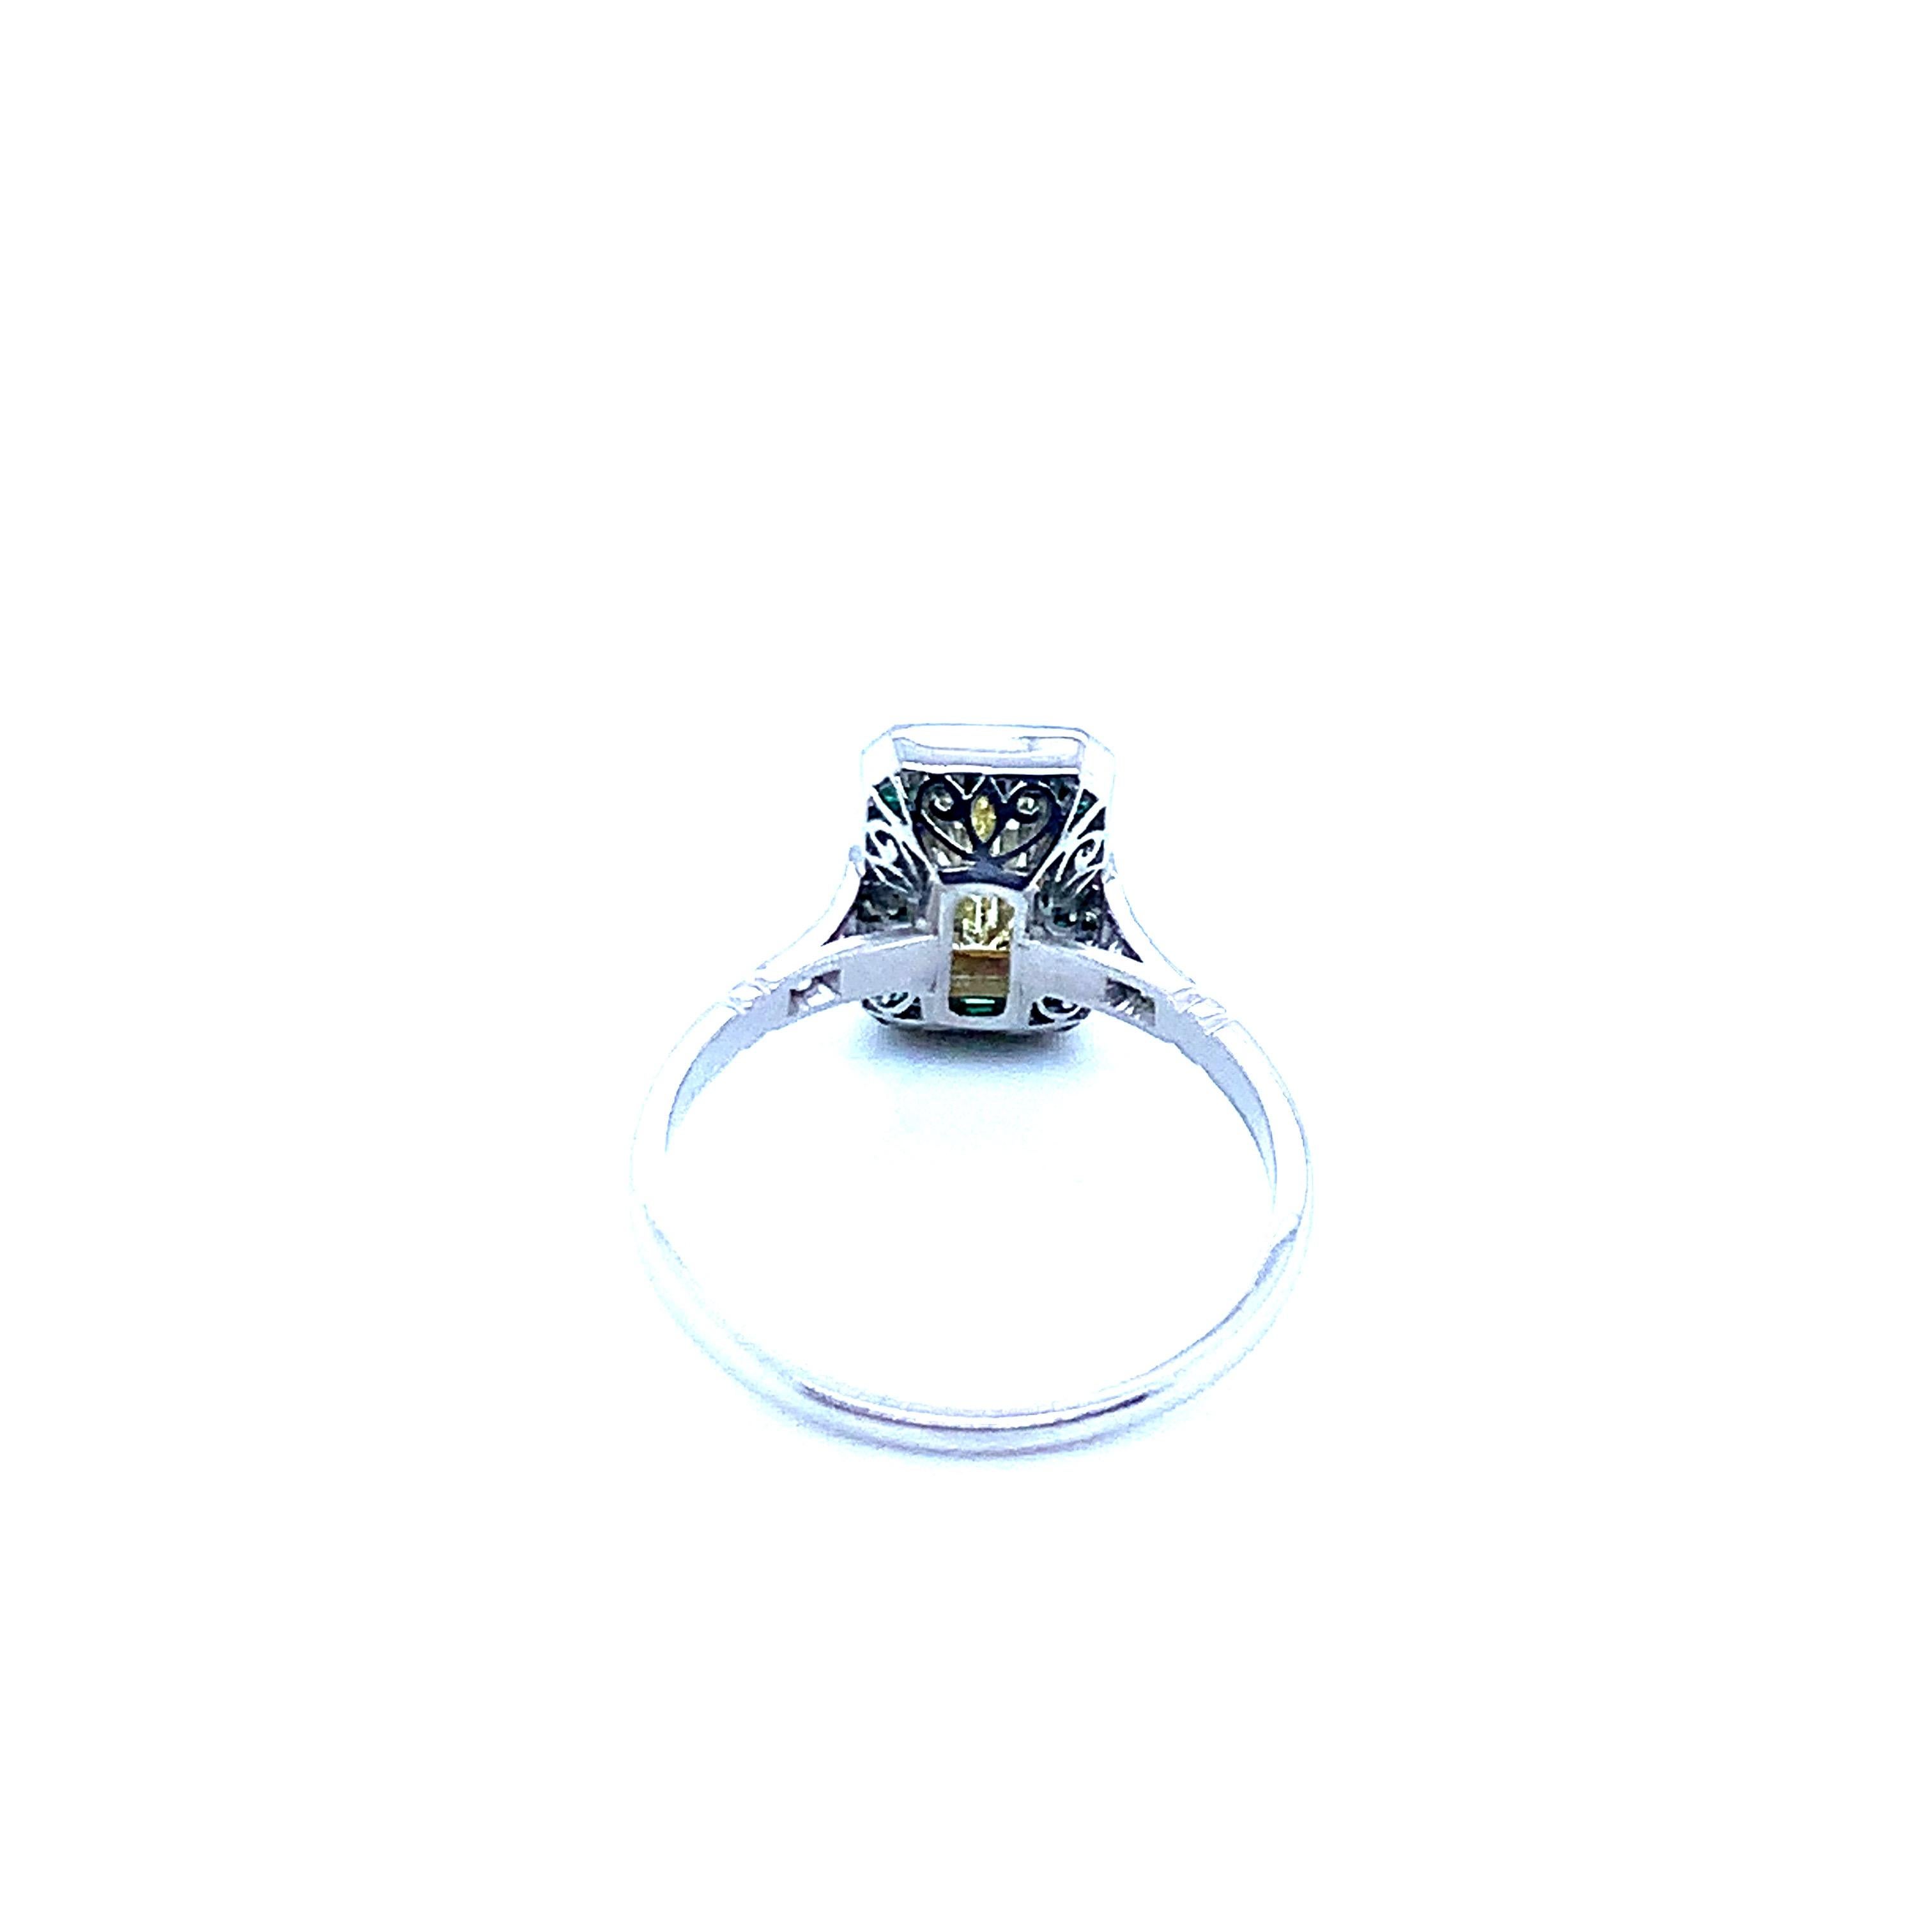 Platinum ring with one baguette cut diamond that weighs 0.71 carat, 6 old mine cut diamonds that weigh 0.09 carat, and 22 emeralds that weigh 0.55 carat. An art deco recreation, this ring weighs 3.6 grams. Size 7.25.